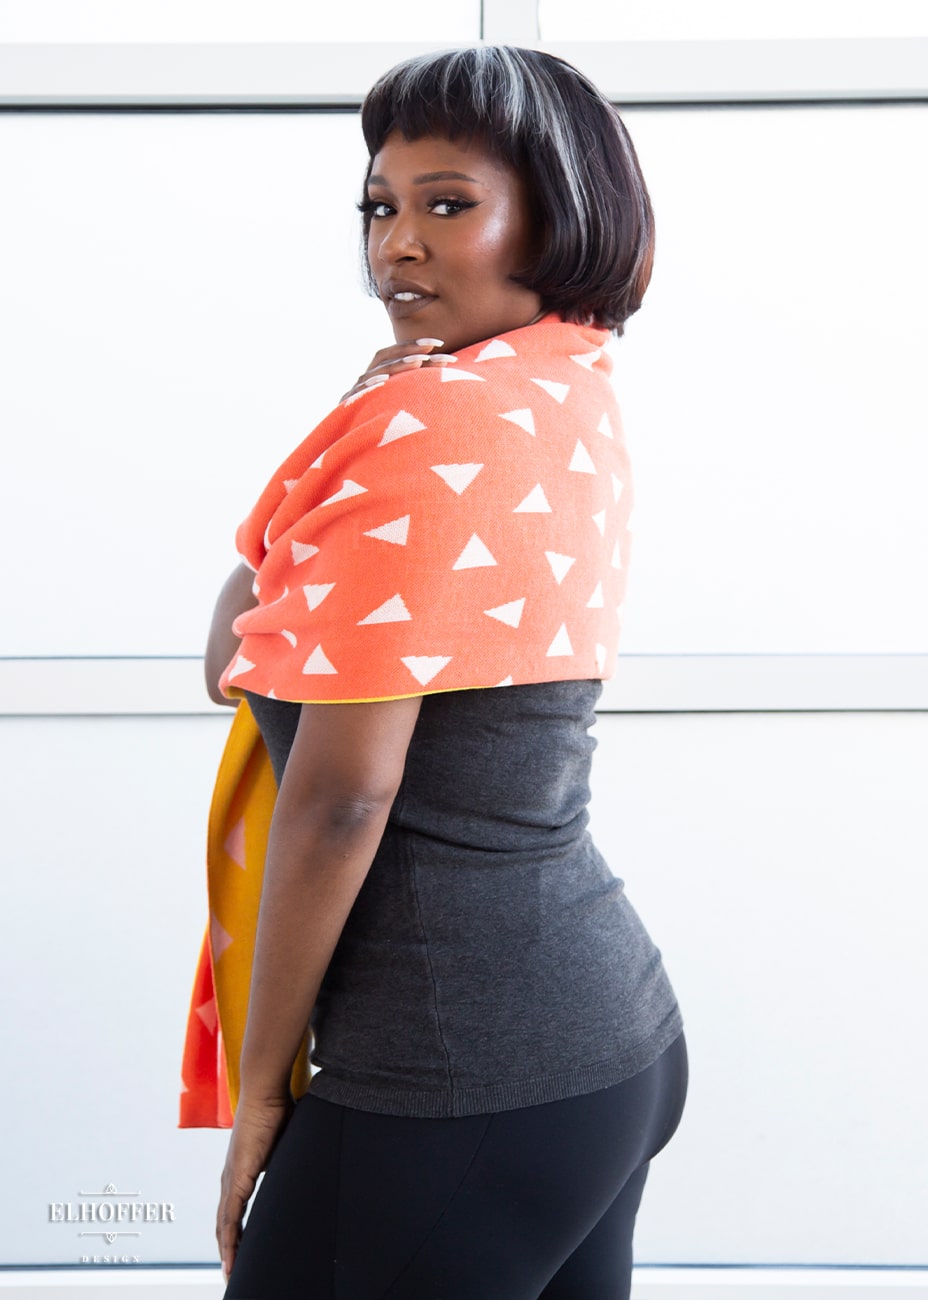 Lynsi, a medium dark skinned M model with short black and white hair, is wearing a reversible knit scarf.  One side of the scarf is orange with white triangles and the other side is yellow with white triangles.